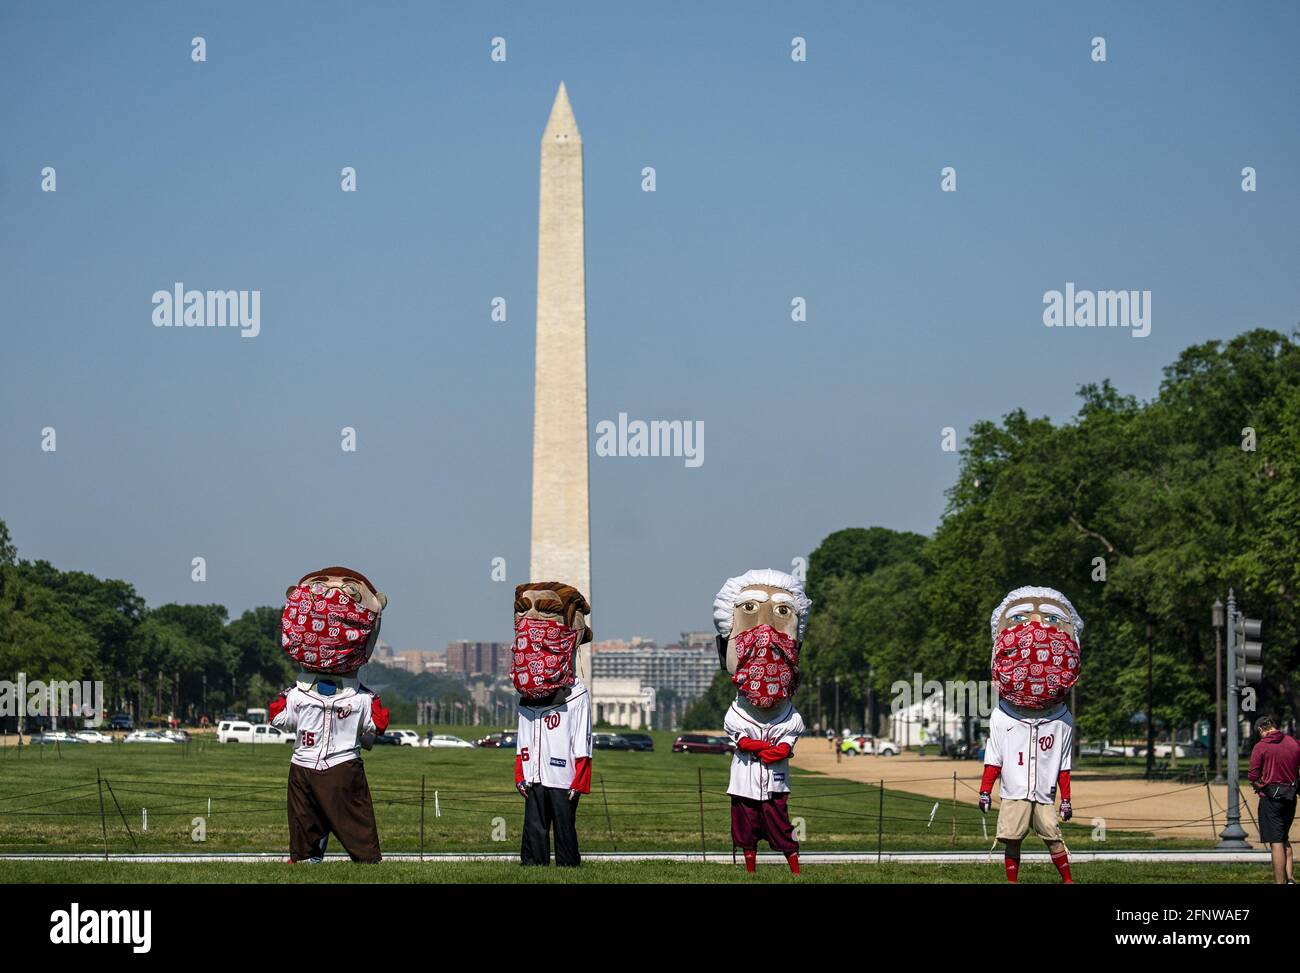 Washington, United States. 19th May, 2021. The Nationals racing presidents are filming scenes on the national mall near the US Capitol in Washington, DC on Wednesday, May 19, 2021. The Presidents Race has featured likenesses of seven former Presidents of the United States, four of whom are found on Mount Rushmore: George Washington, Abraham Lincoln, Thomas Jefferson, and Theodore Roosevelt, race around the field in the middle of the fourth inning of every home game. Photo by Tasos Katopodis/UPI Credit: UPI/Alamy Live News Stock Photo